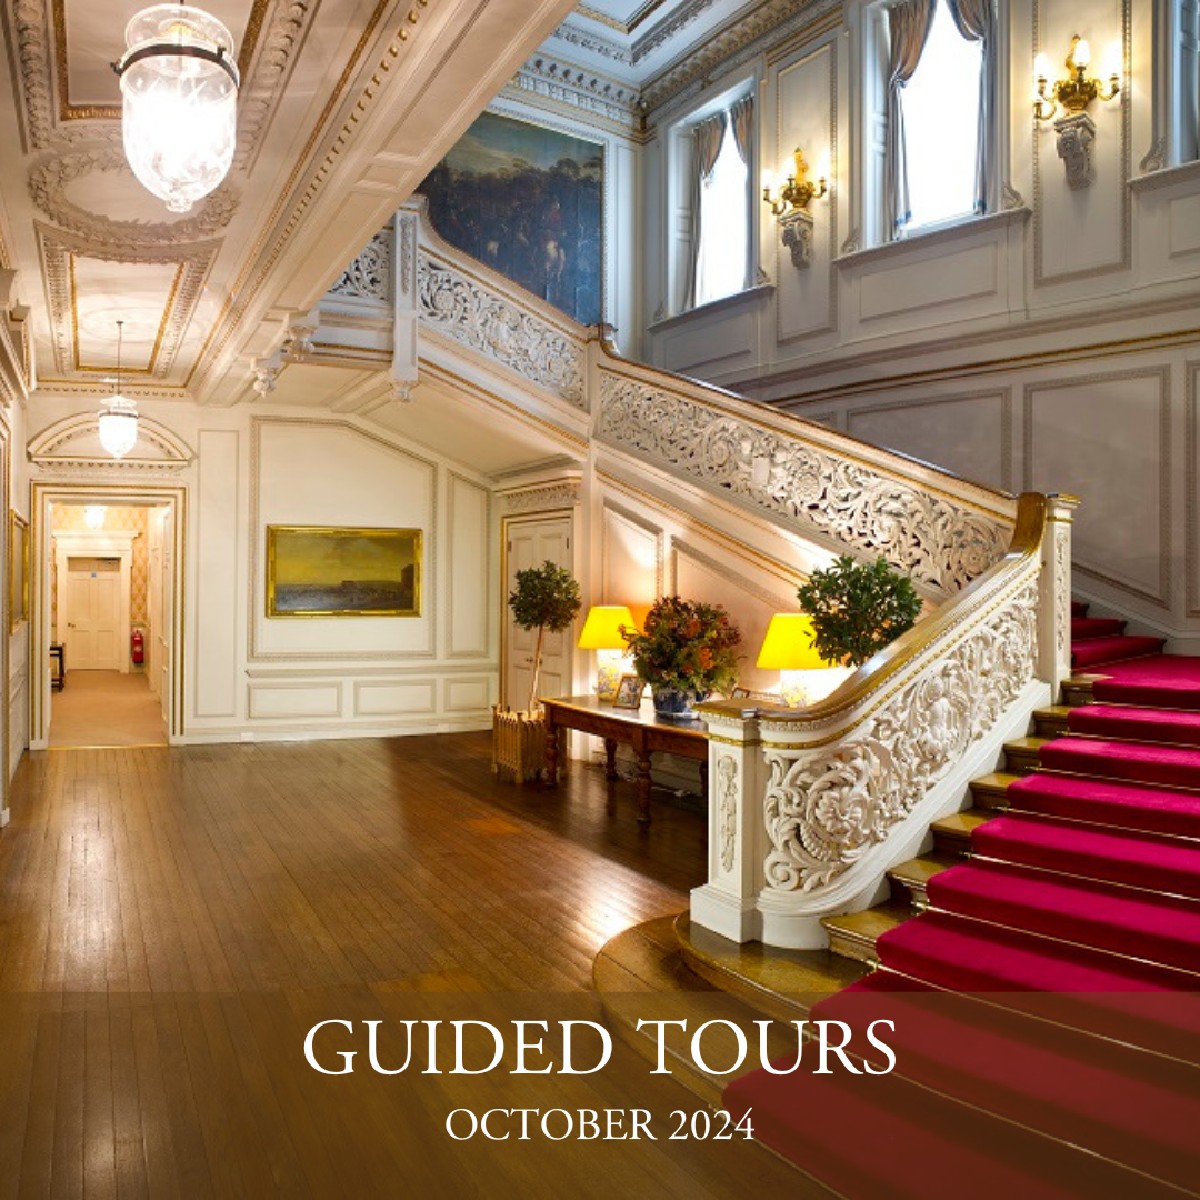 Discover the history and beauty of Knowsley Hall on our guided tours this October! Tickets on sale now, book via the link: brnw.ch/21wIv3n #artlovers #historichouses #statelyhome #historytours #historichomes #historylovers #heritagetours